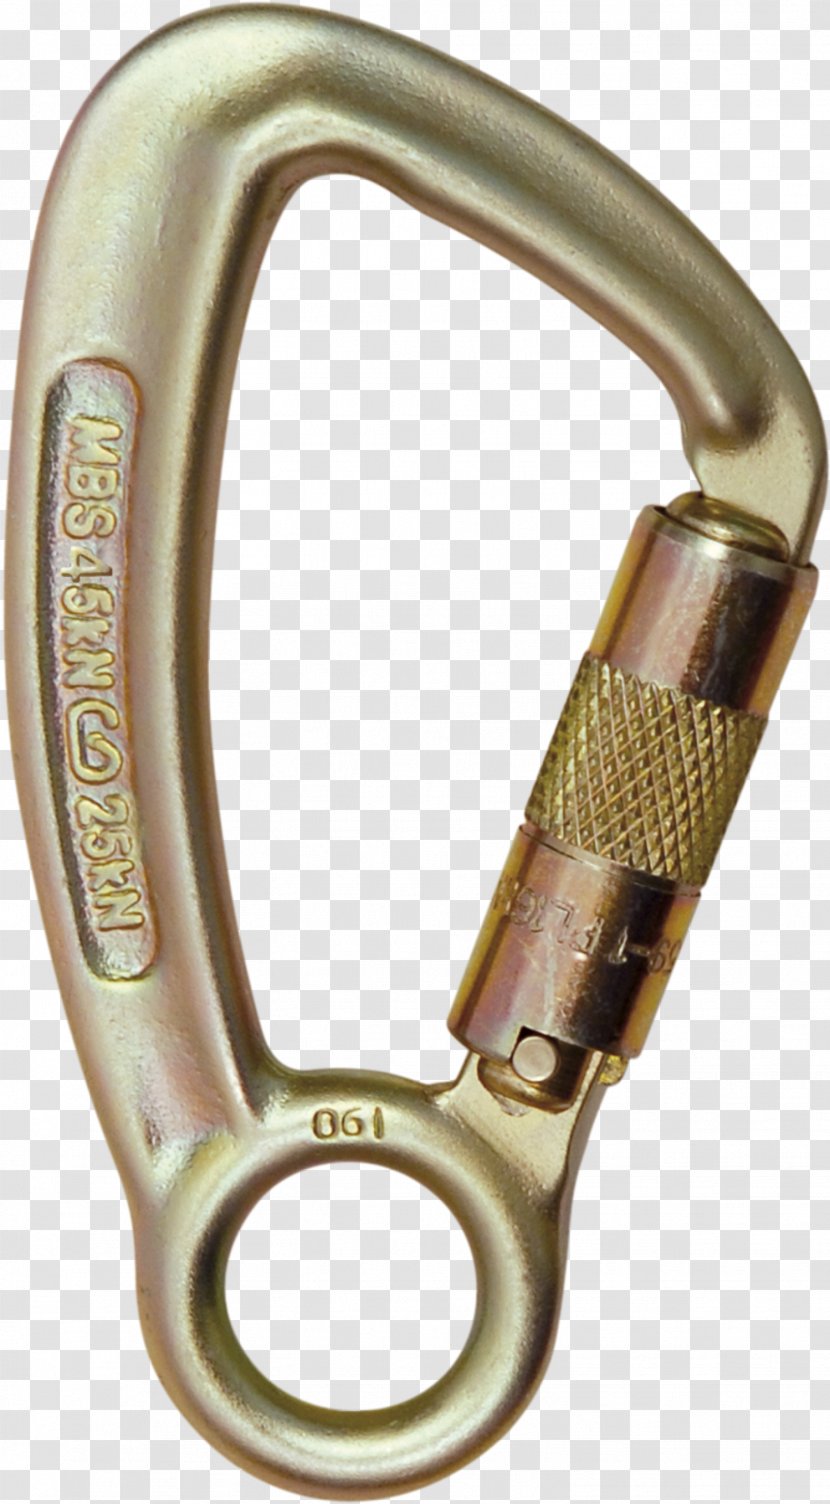 Carabiner Complete Fire And Rescue Aluminium Newton Lock - Csa Group Transparent PNG